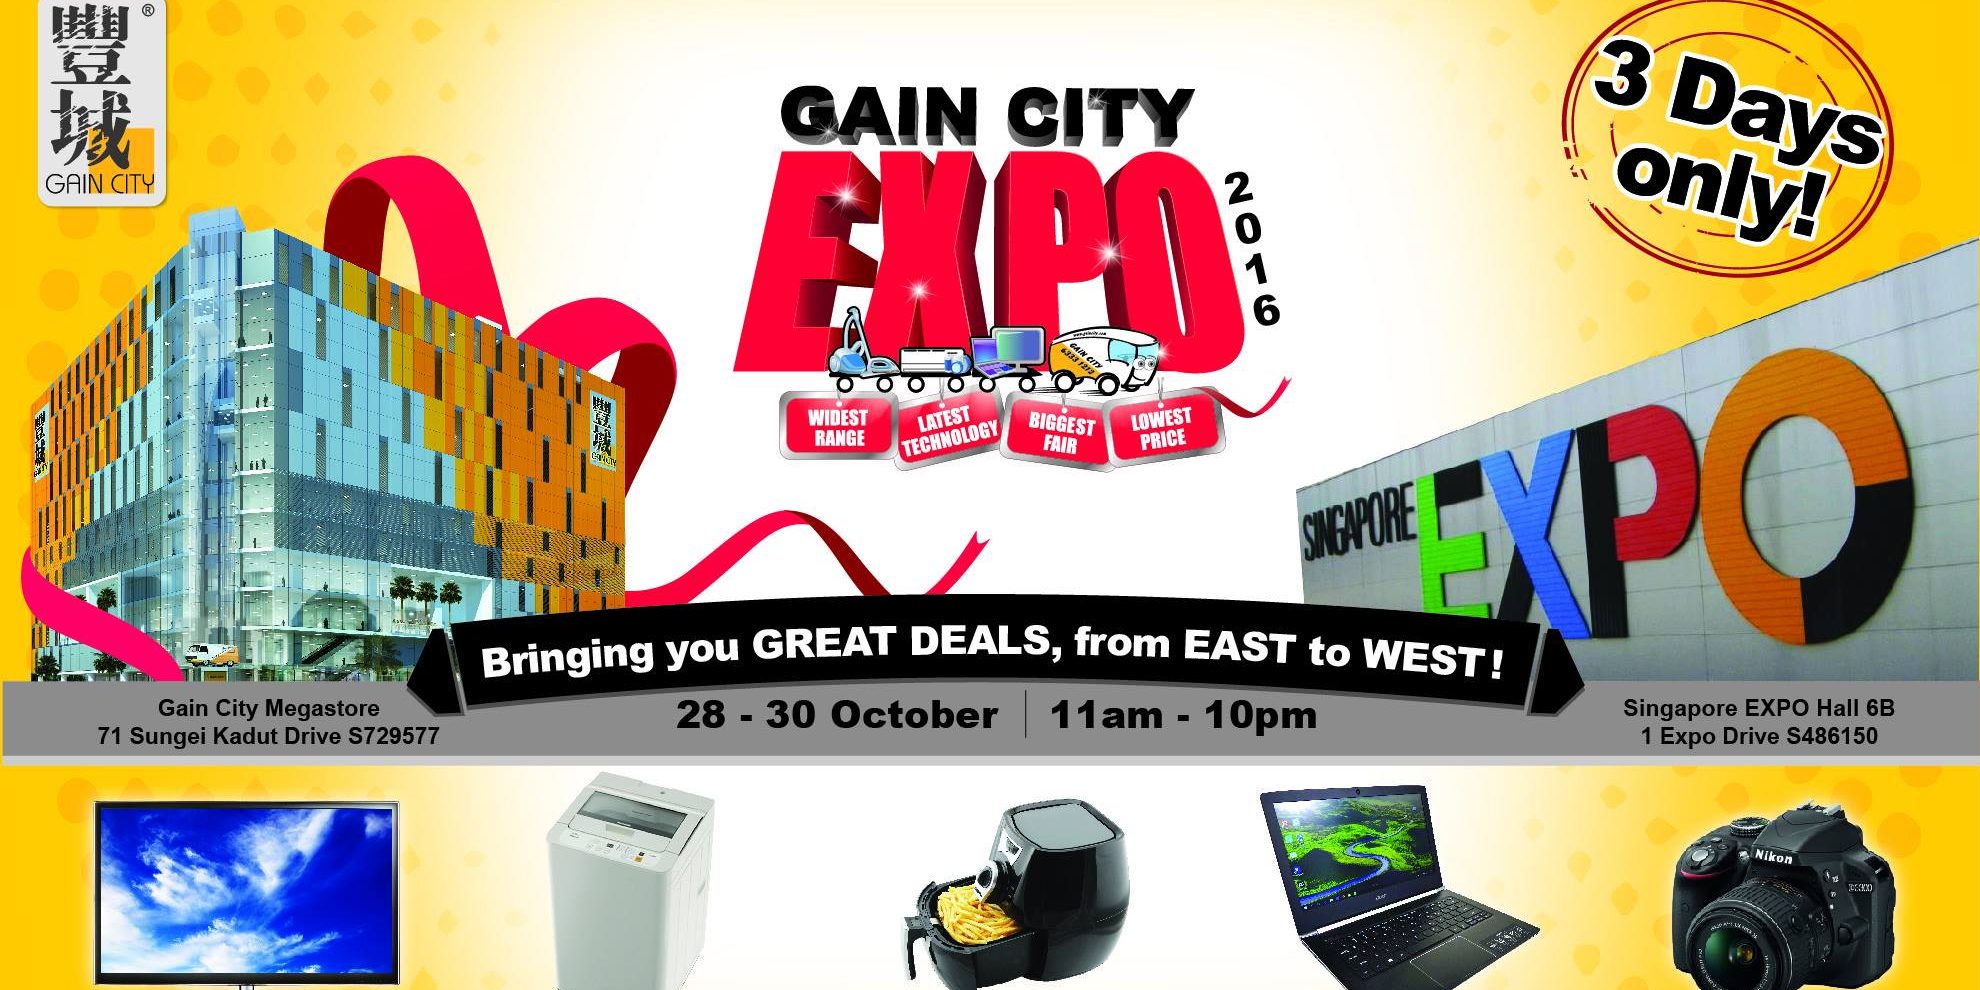 Gain City Singapore EXPO Sales 3 Days Only Promotion 28-30 Oct 2016